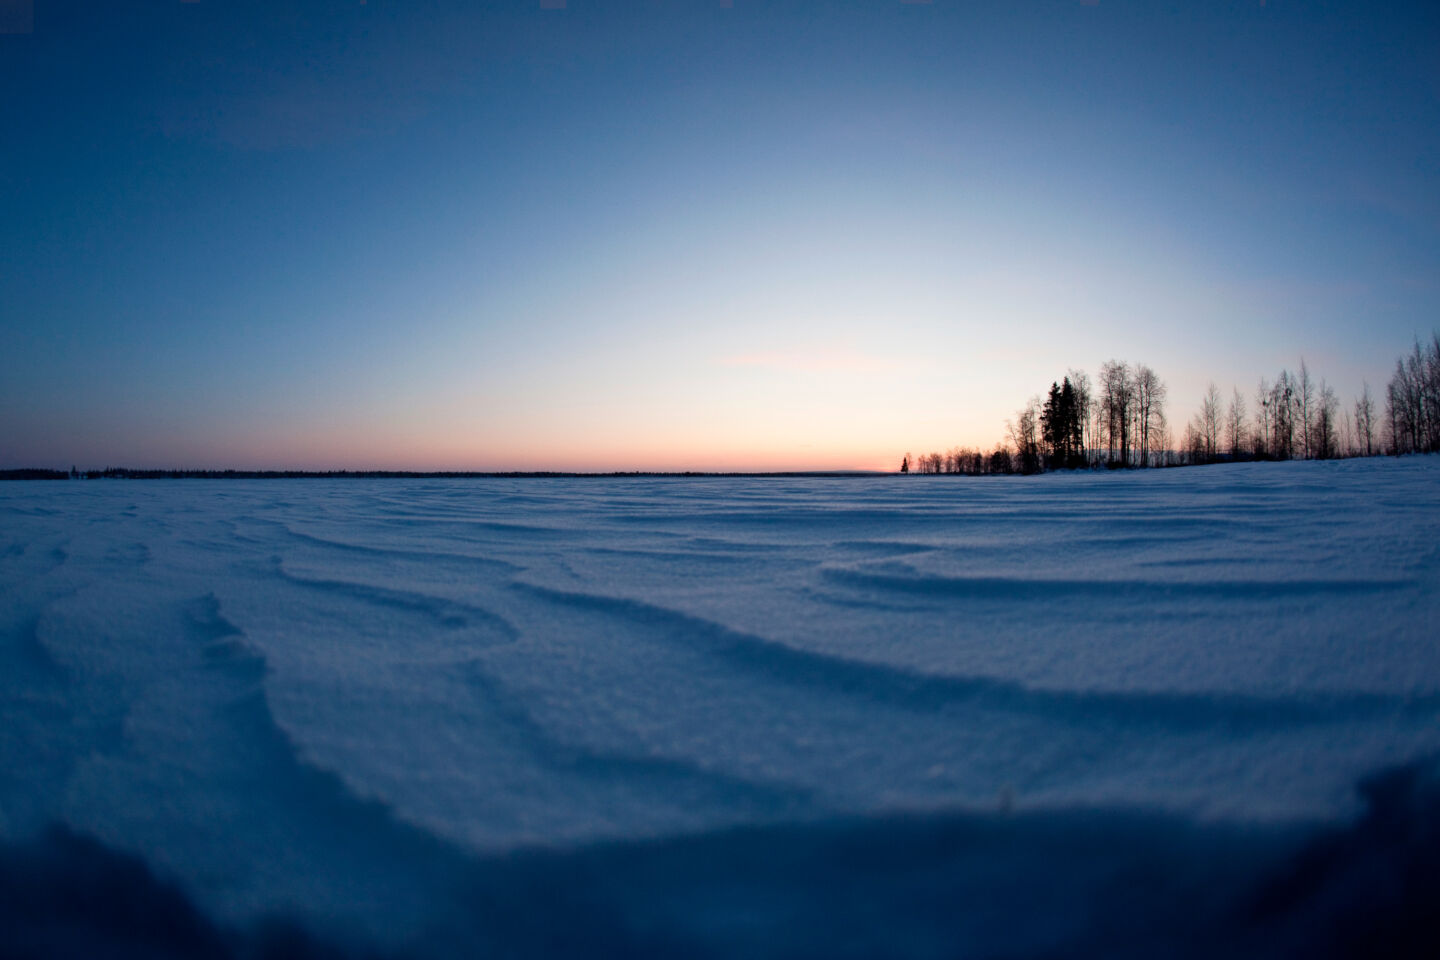 Filming sunrise over a frozen lake in Finnish Lapland